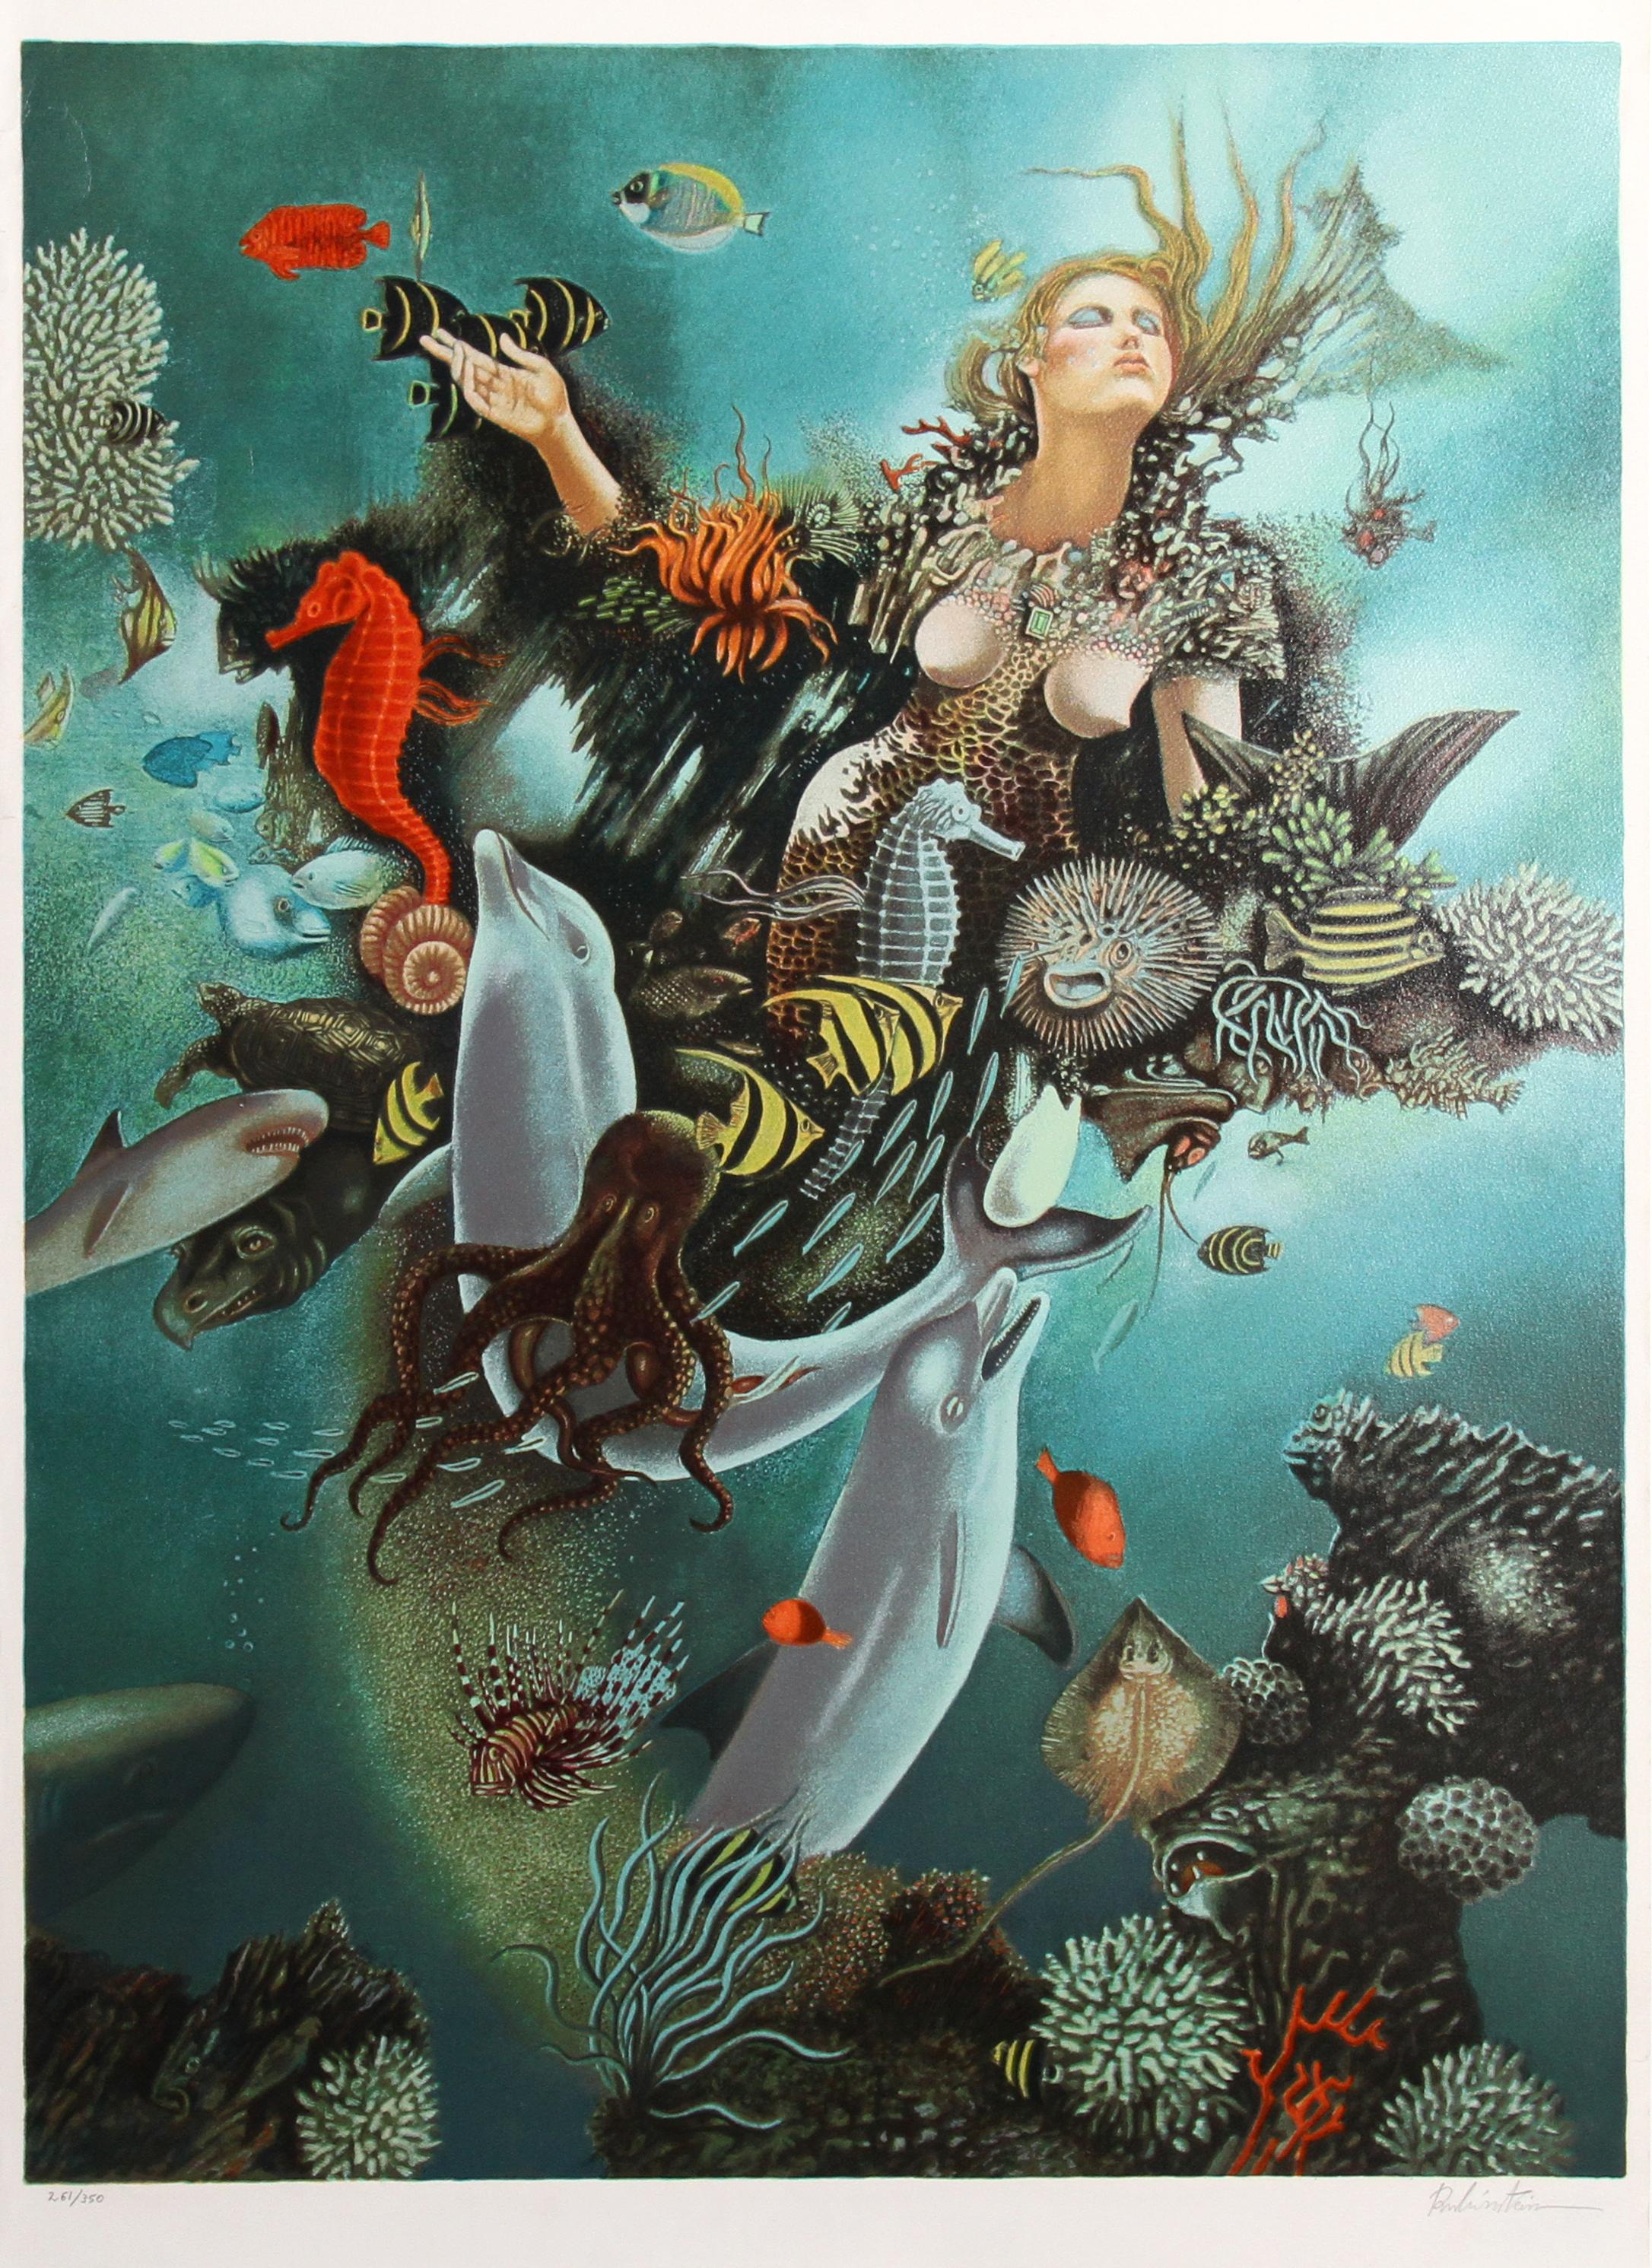 Goddess of the Sea


Israel Rubinstein
Israeli (1944)

Date: 1980
Screenprint, signed and numbered in pencil
Edition of 300
Image Size: 36 x 26.5 inches
Size: 39 x 27.5 in. (99.06 x 69.85 cm)